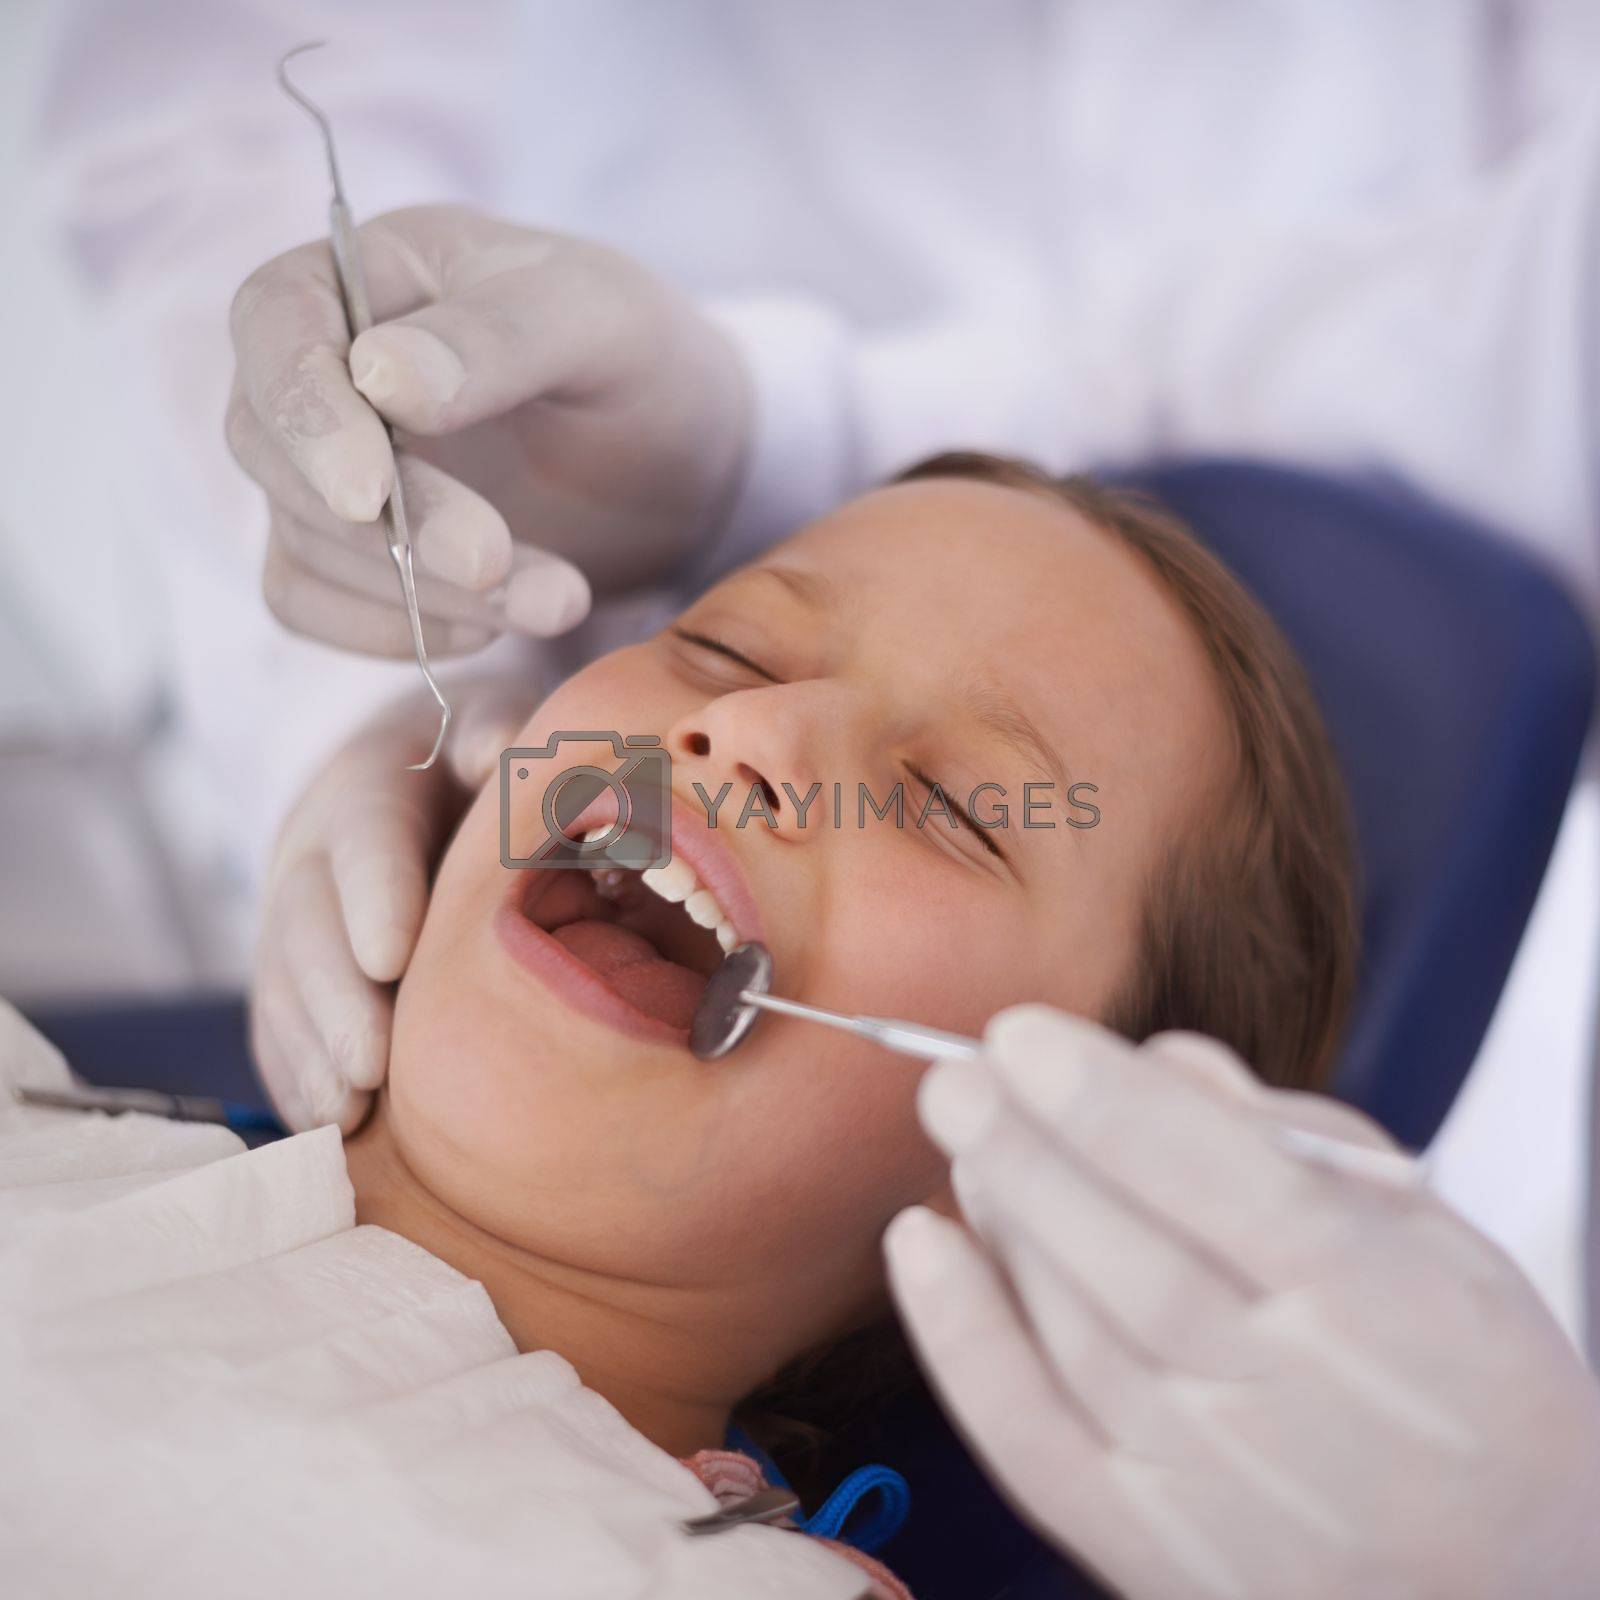 Royalty free image of Everything seems to be in order. A dentist performing a dental examination of a little girls teeth. by YuriArcurs